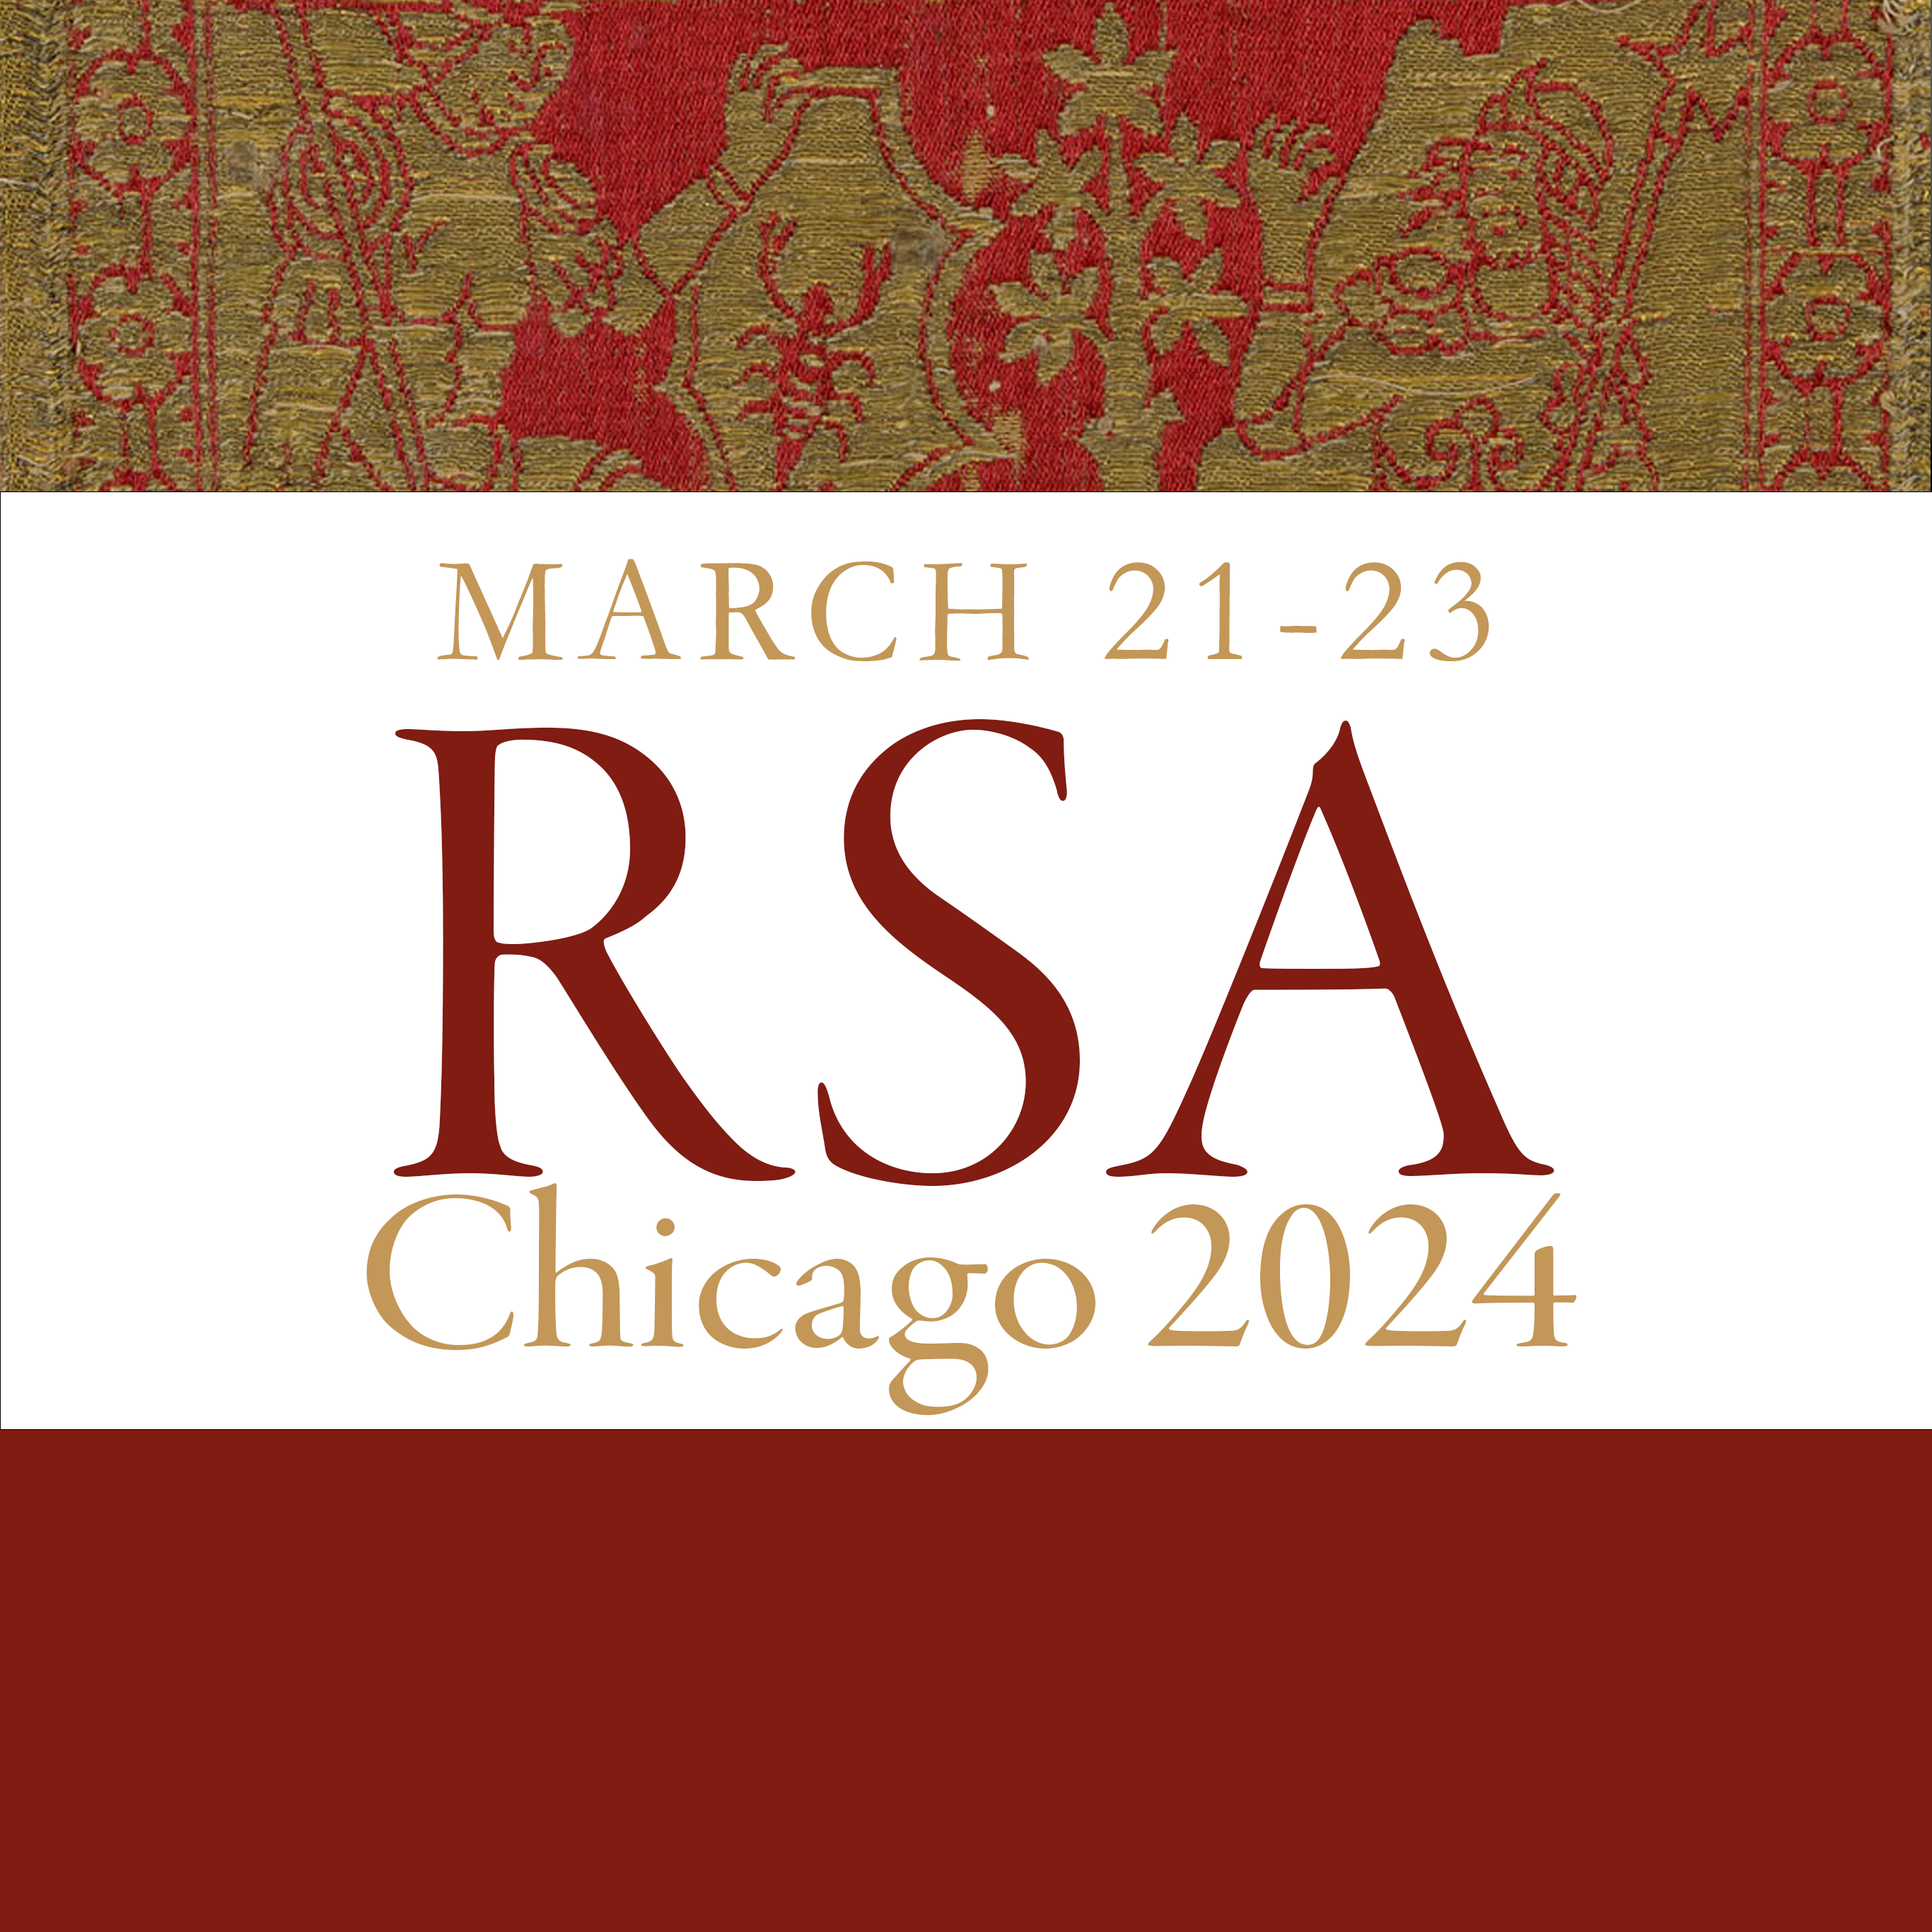 The 70th Annual Meeting of the Renaissance Society of America (Chicago, Illinois)